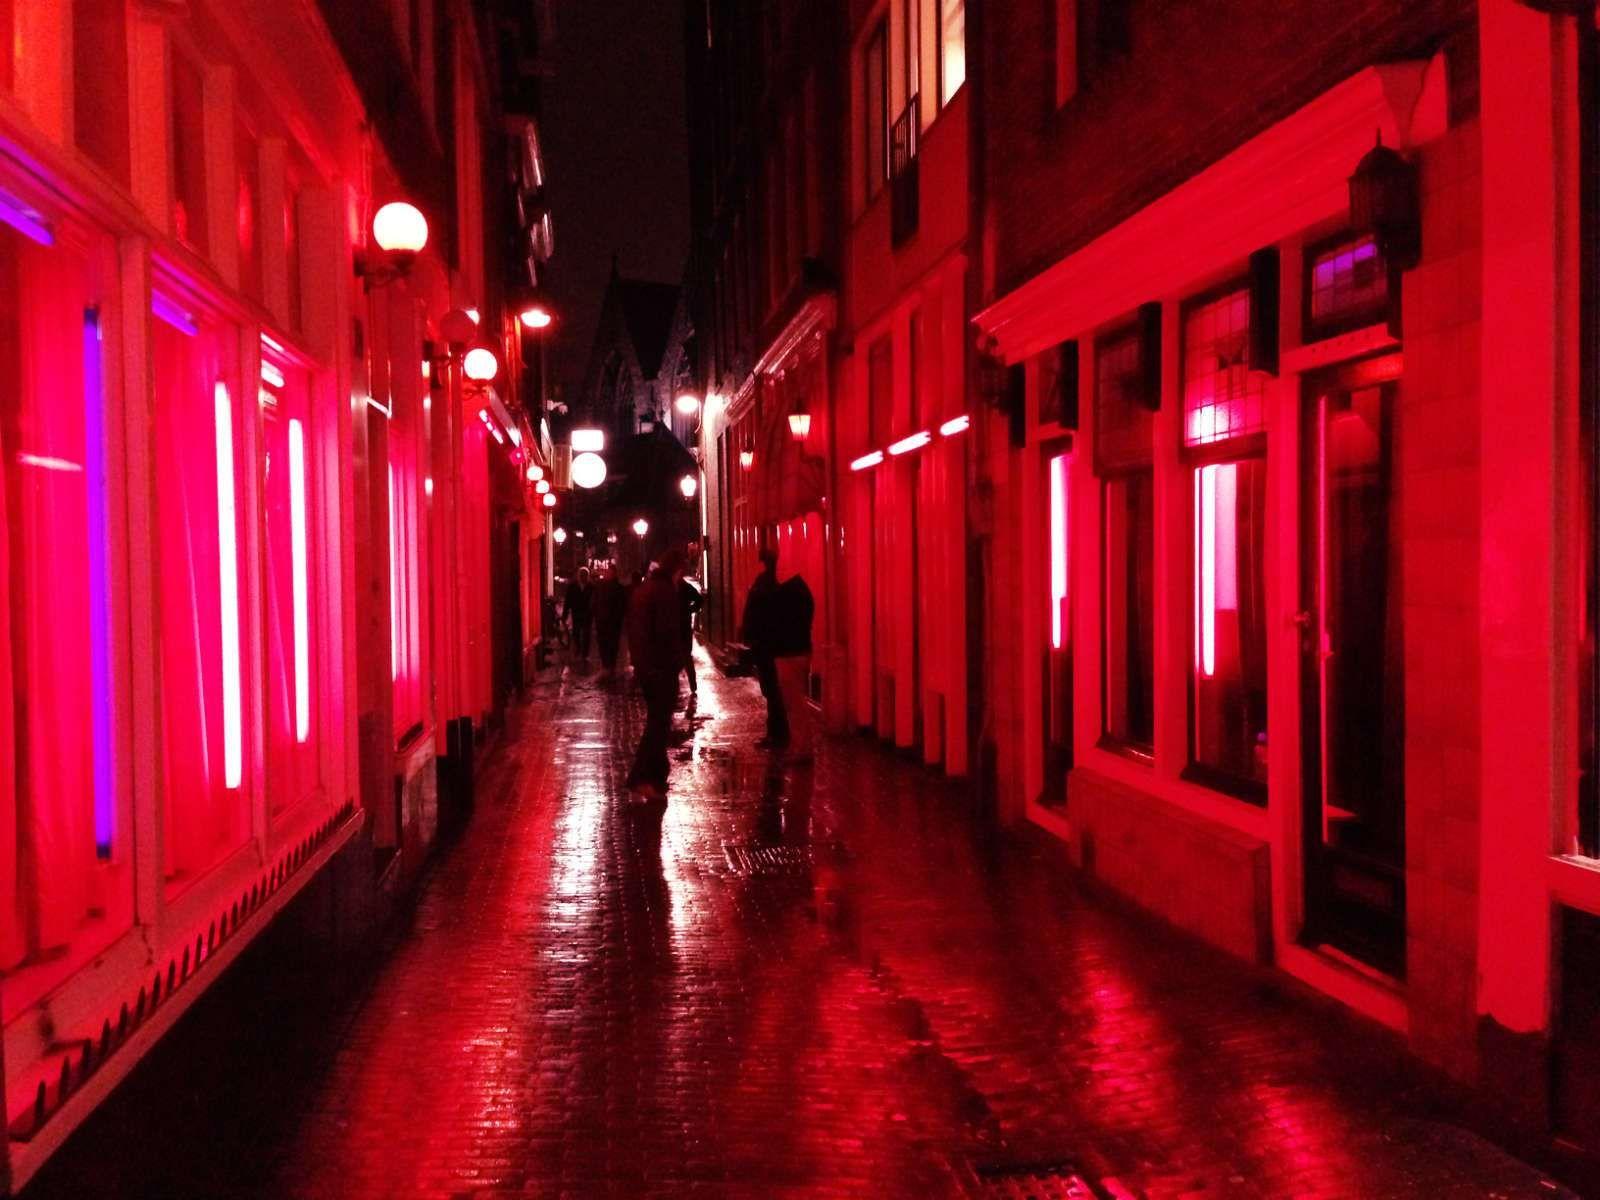 Inside Amsterdam's Red Light District. The Wild Party